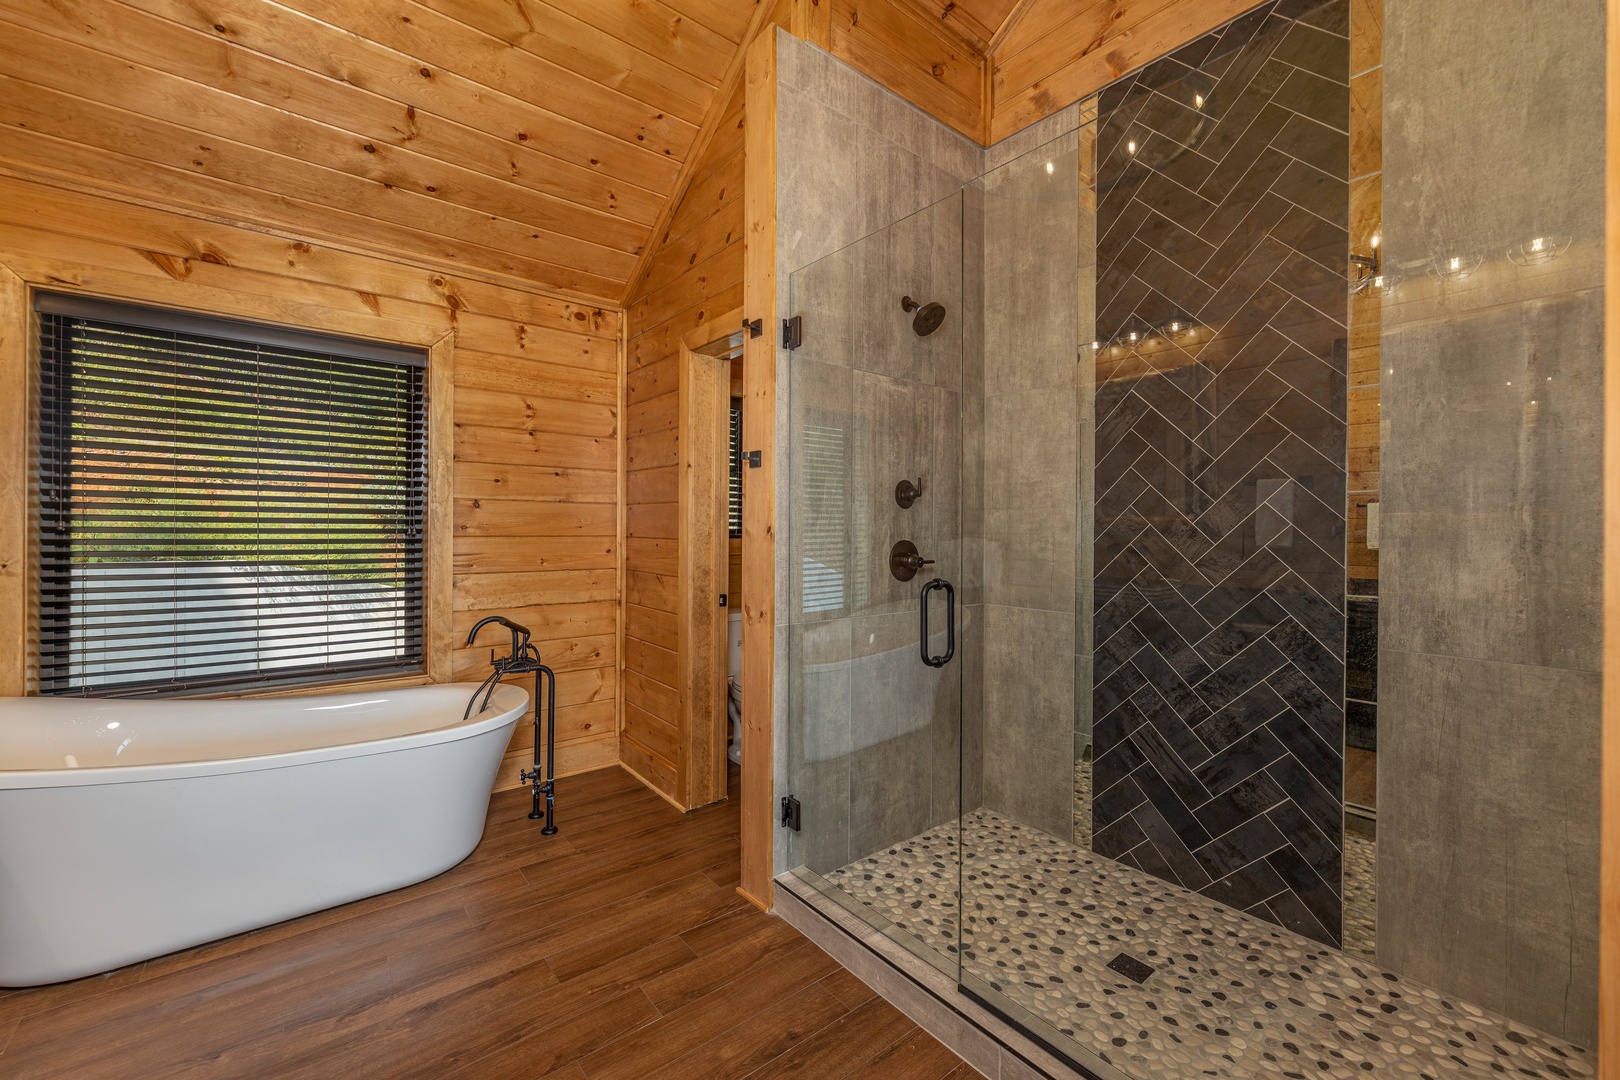 Bathroom with a soaker tub and walk in shower at Black Bears & Biscuits Lodge, a 6 bedroom cabin rental located in Pigeon Forge